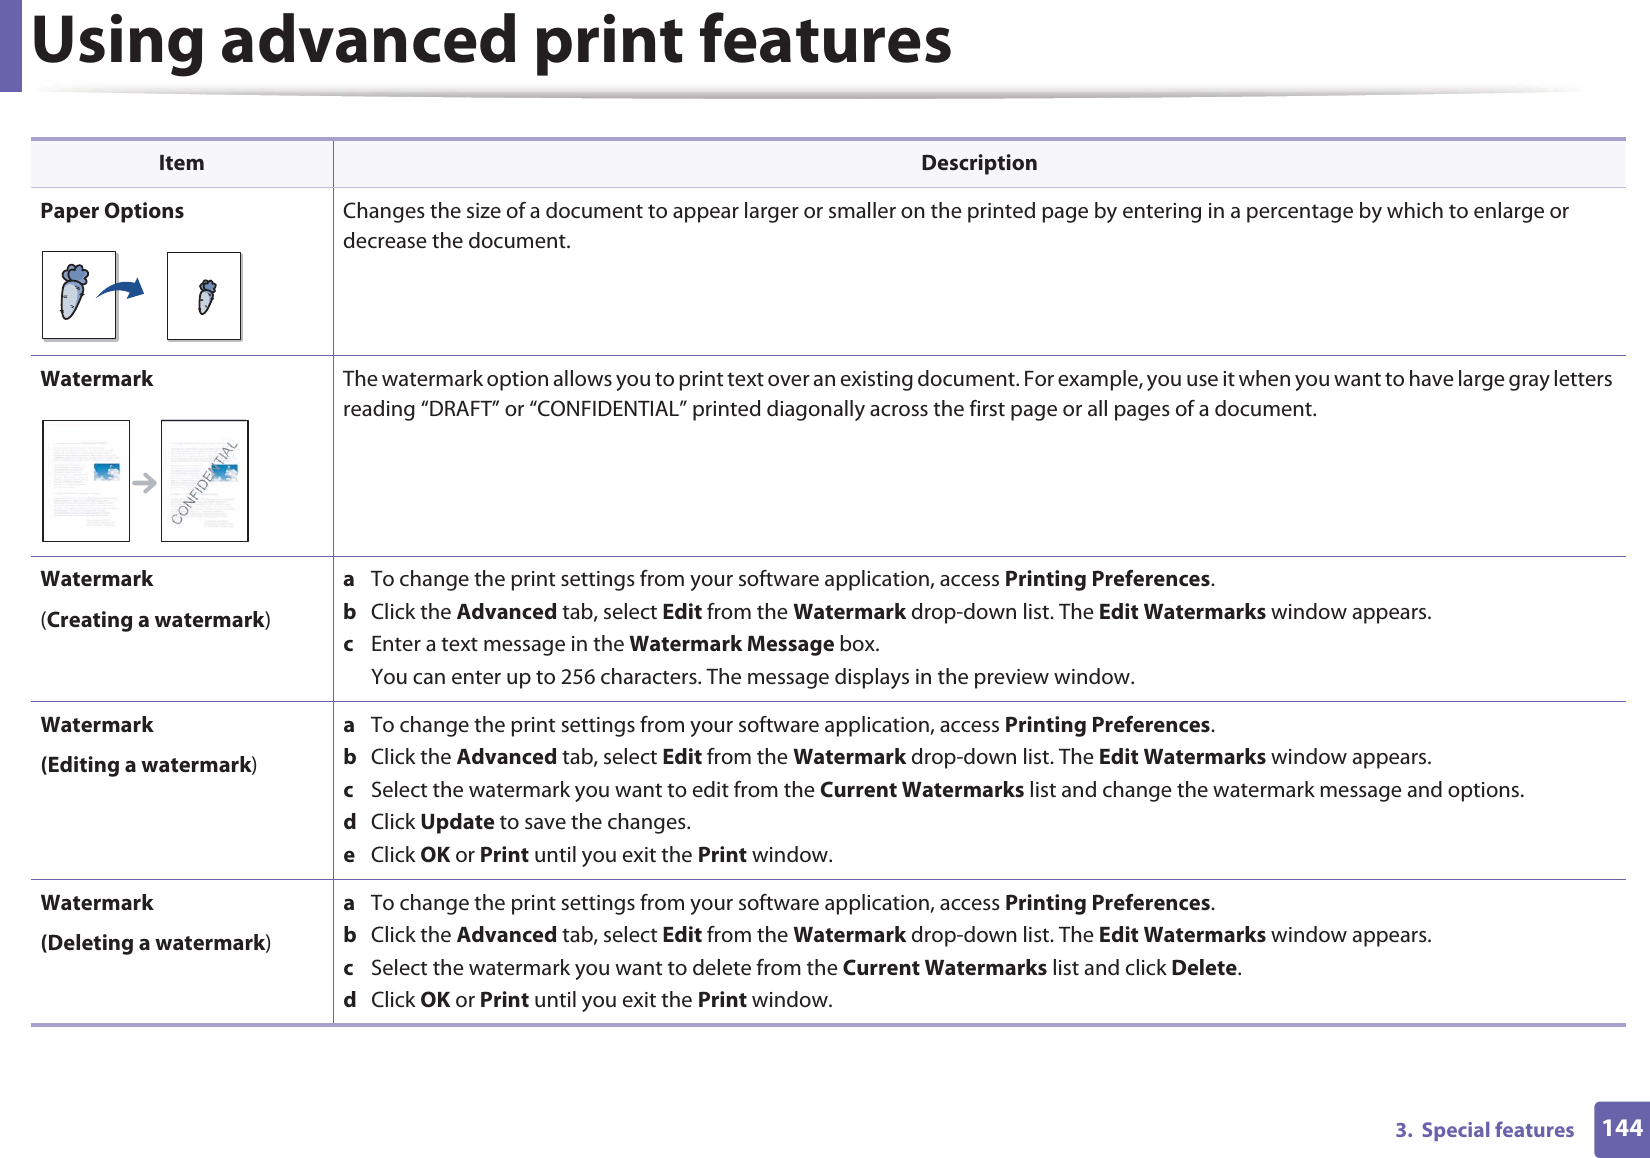 Using advanced print features1443.  Special featuresPaper Options Changes the size of a document to appear larger or smaller on the printed page by entering in a percentage by which to enlarge or decrease the document.Watermark The watermark option allows you to print text over an existing document. For example, you use it when you want to have large gray letters reading “DRAFT” or “CONFIDENTIAL” printed diagonally across the first page or all pages of a document. Watermark(Creating a watermark)a  To change the print settings from your software application, access Printing Preferences.b  Click the Advanced tab, select Edit from the Watermark drop-down list. The Edit Watermarks window appears.c  Enter a text message in the Watermark Message box. You can enter up to 256 characters. The message displays in the preview window.Watermark(Editing a watermark)a  To change the print settings from your software application, access Printing Preferences.b  Click the Advanced tab, select Edit from the Watermark drop-down list. The Edit Watermarks window appears. c  Select the watermark you want to edit from the Current Watermarks list and change the watermark message and options. d  Click Update to save the changes.e  Click OK or Print until you exit the Print window. Watermark(Deleting a watermark)a  To change the print settings from your software application, access Printing Preferences.b  Click the Advanced tab, select Edit from the Watermark drop-down list. The Edit Watermarks window appears. c  Select the watermark you want to delete from the Current Watermarks list and click Delete. d  Click OK or Print until you exit the Print window.Item Description